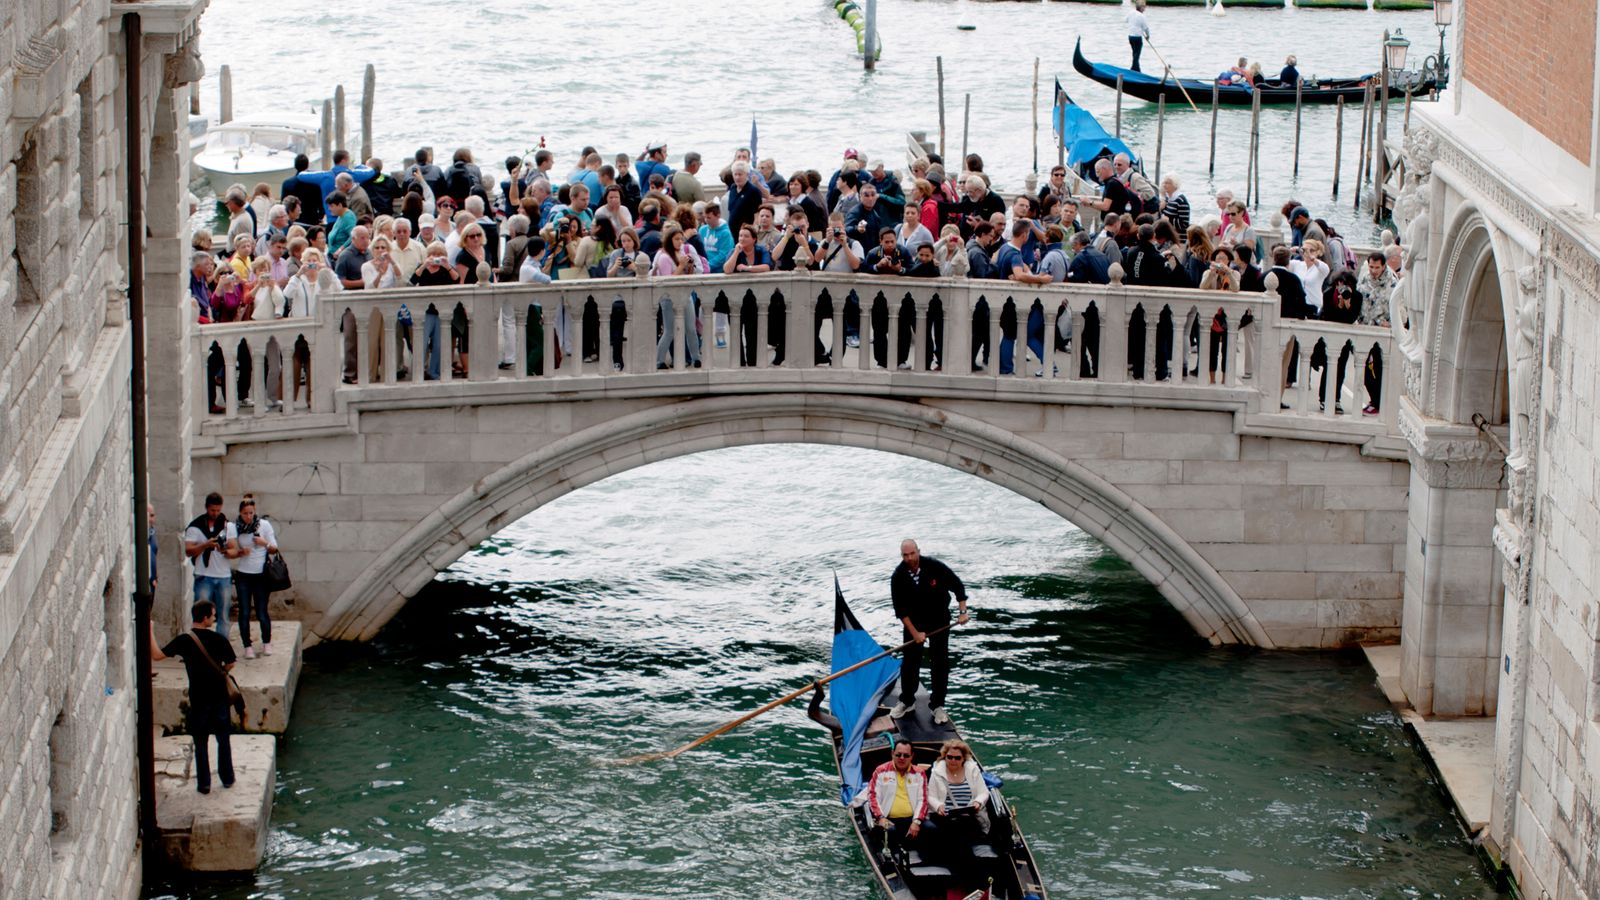 Venice to limit size of tourist groups in bid to ease pressure of huge crowds